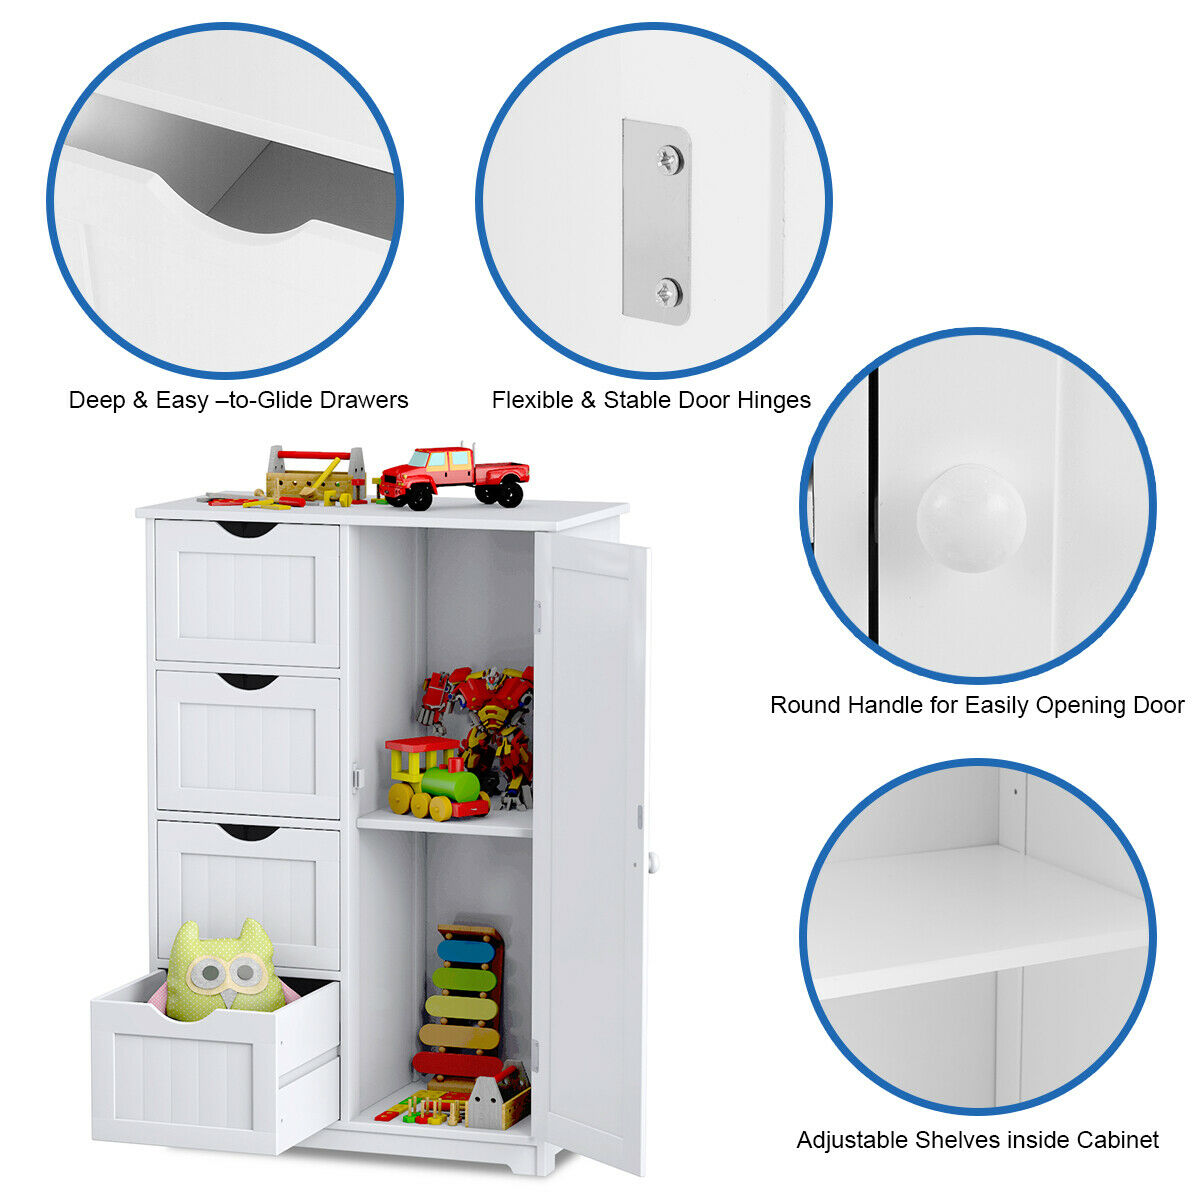 Costway Wooden 4 Drawer Bathroom Cabinet Storage Cupboard 2 Shelves Free Standing White - image 3 of 10